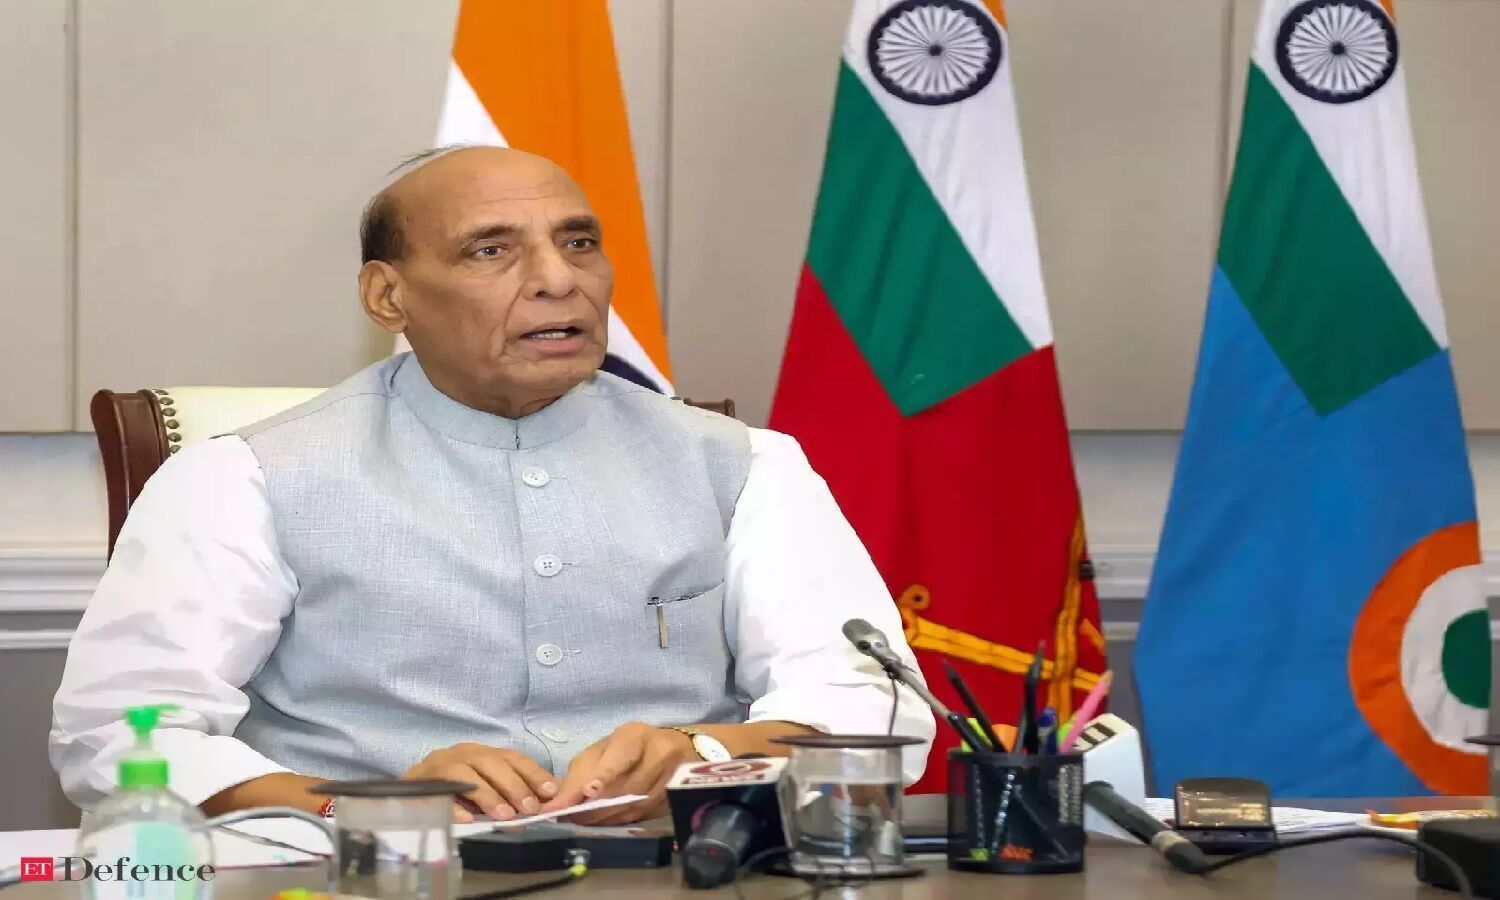 Rajnath Singh’s visit to Egypt: Will be on a two-day official visit from September 19